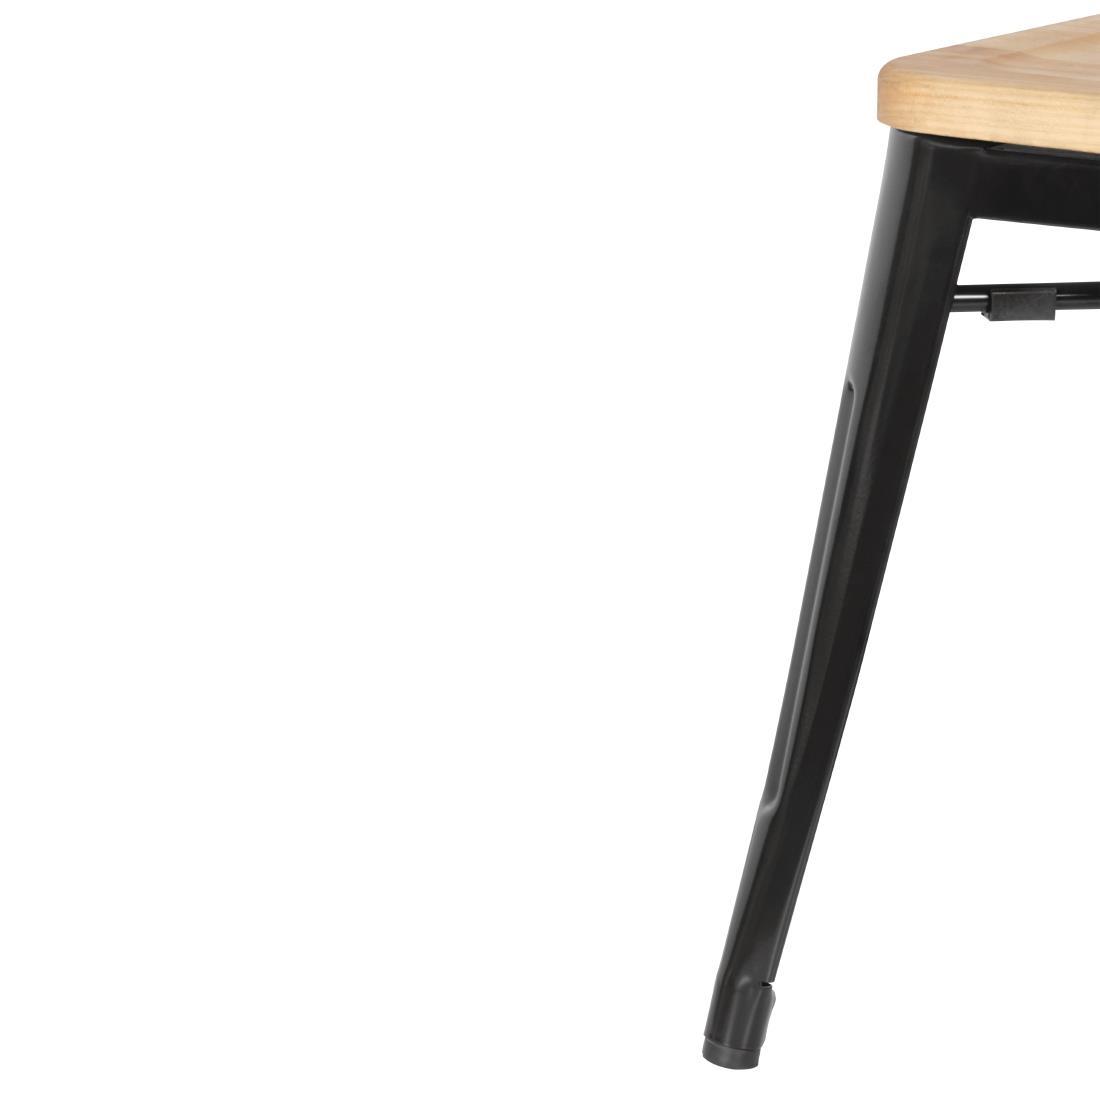 Bolero Bistro Low Stools with Wooden Seat Pad Black (Pack of 4) - GM635  - 6